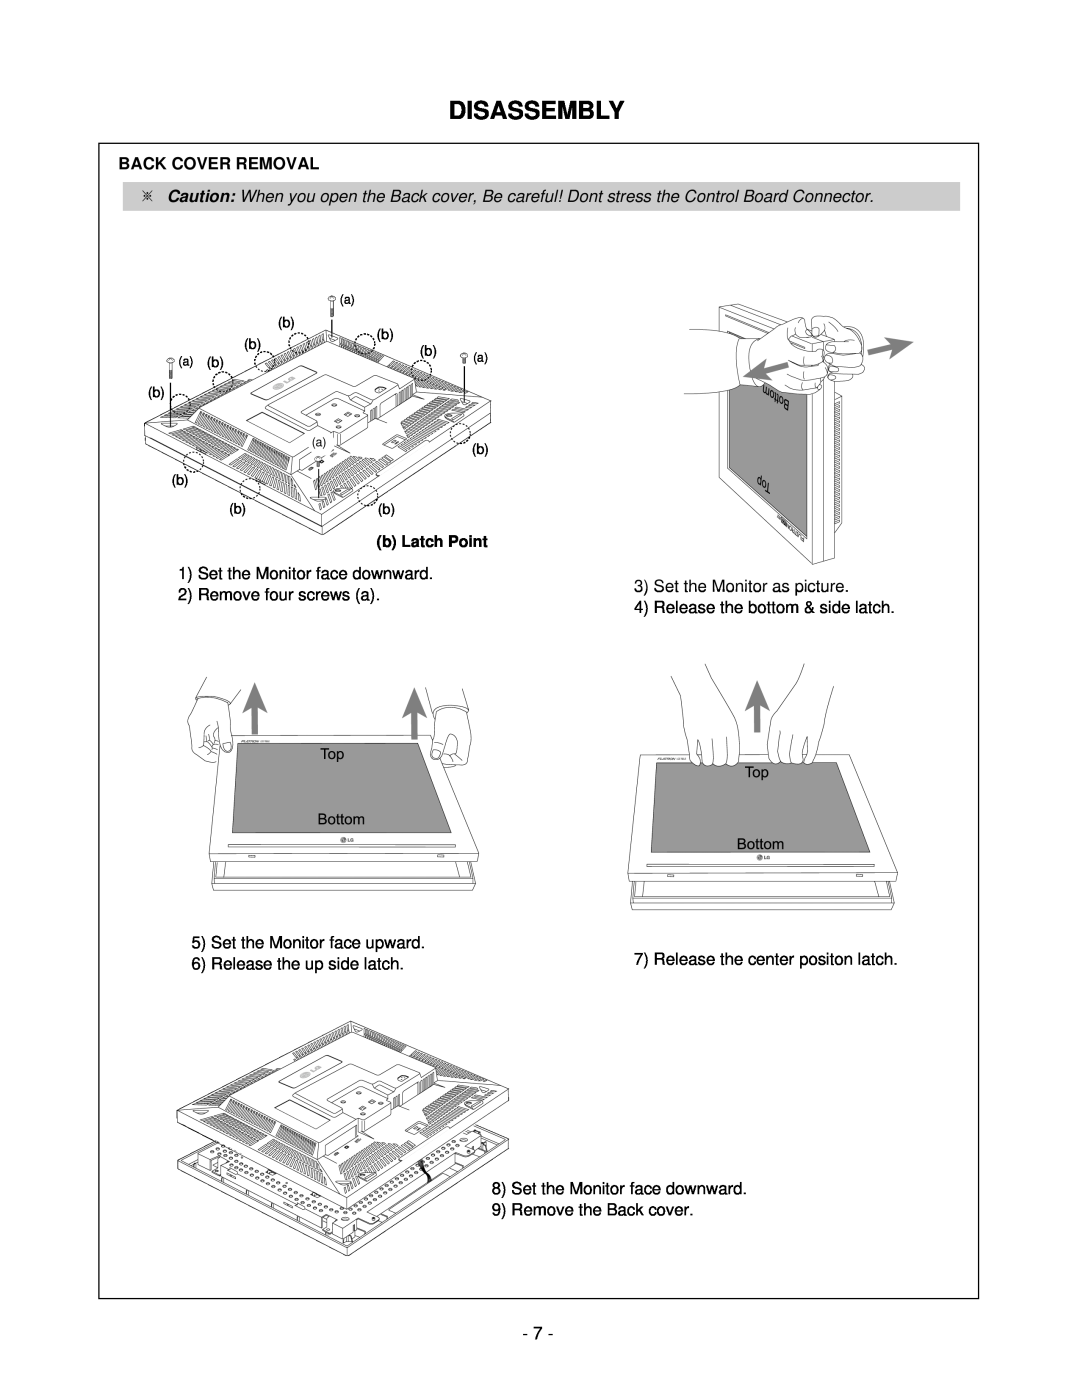 LG Electronics LCD 782LS service manual Disassembly, Back Cover Removal 